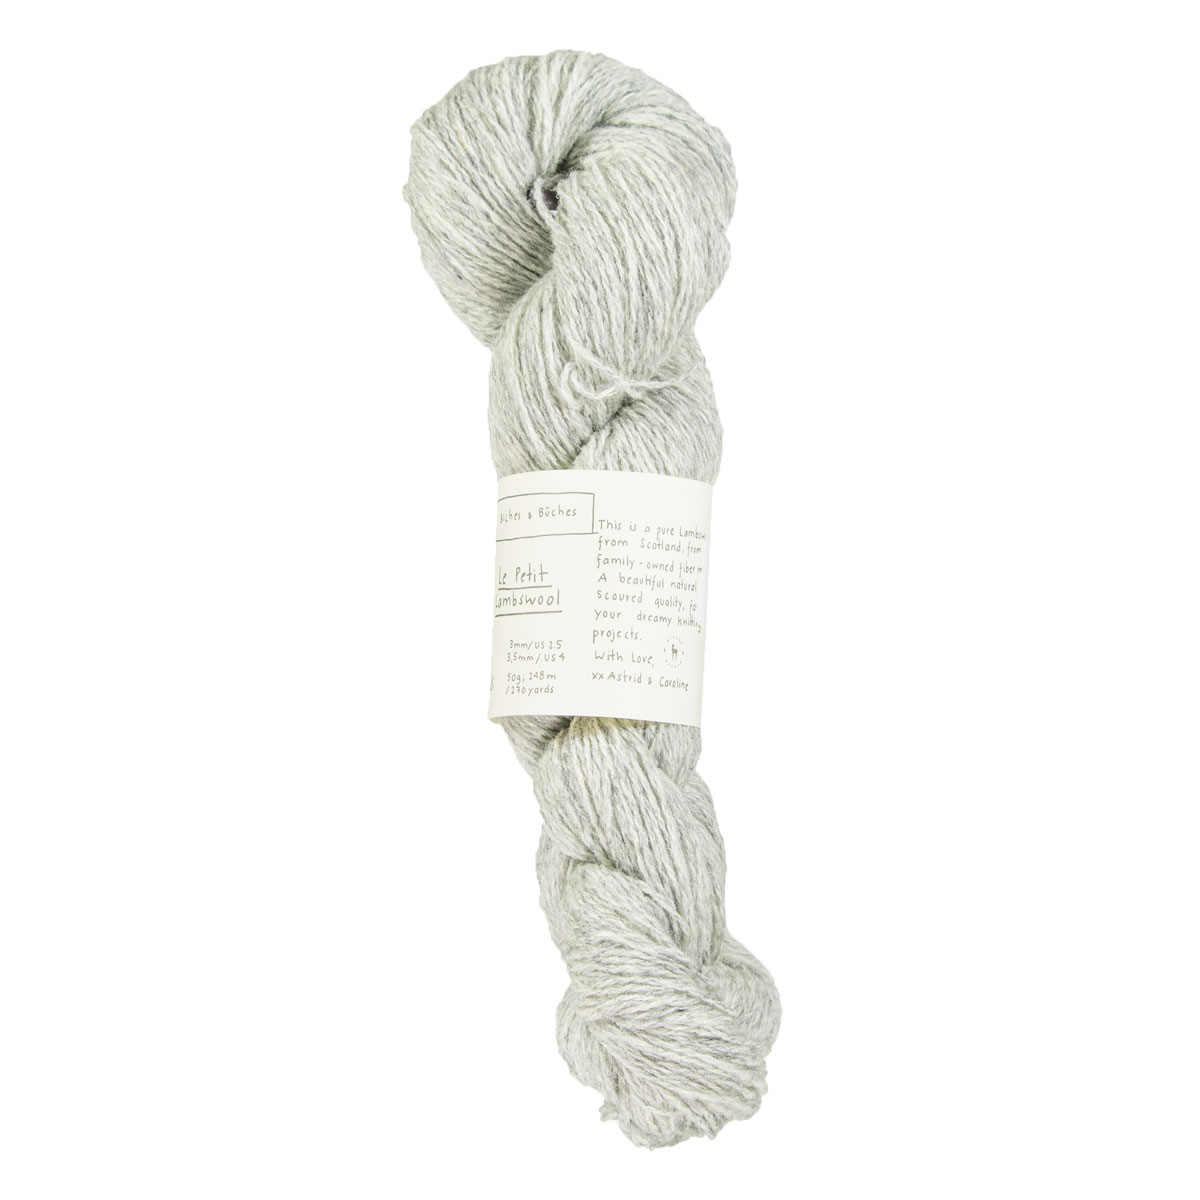 Le Lambswool – BichesetBuches